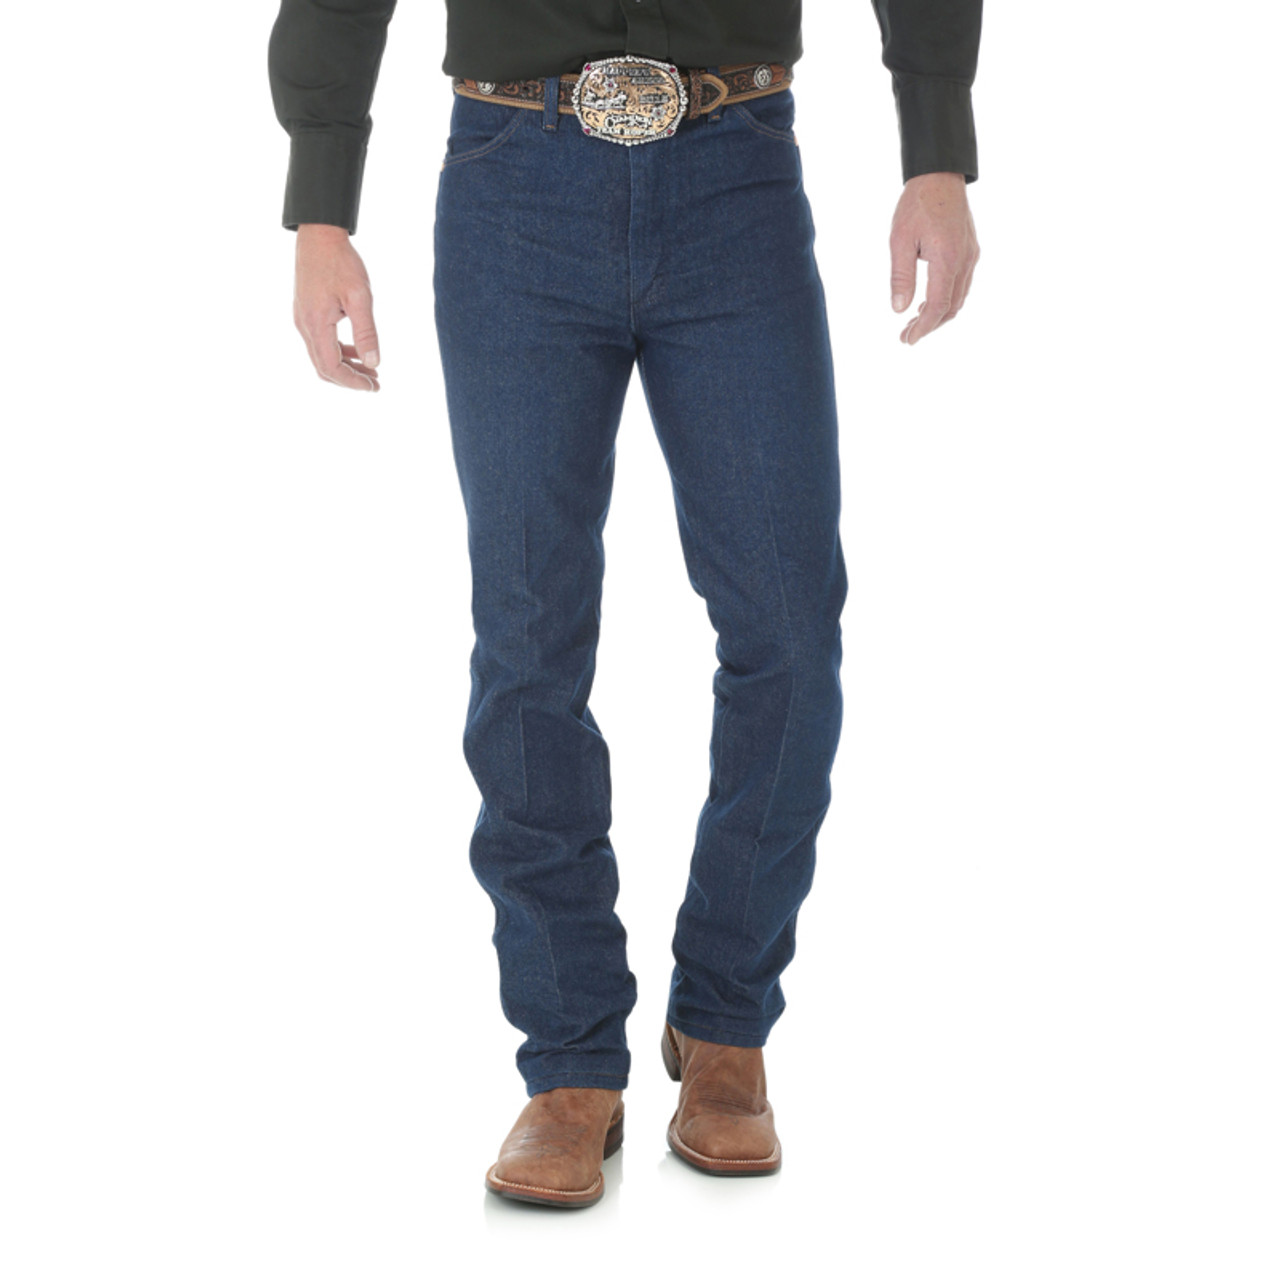 Wrangler Mens Cowboy Cut Slim Fit Official ProRodeo Competition Jean